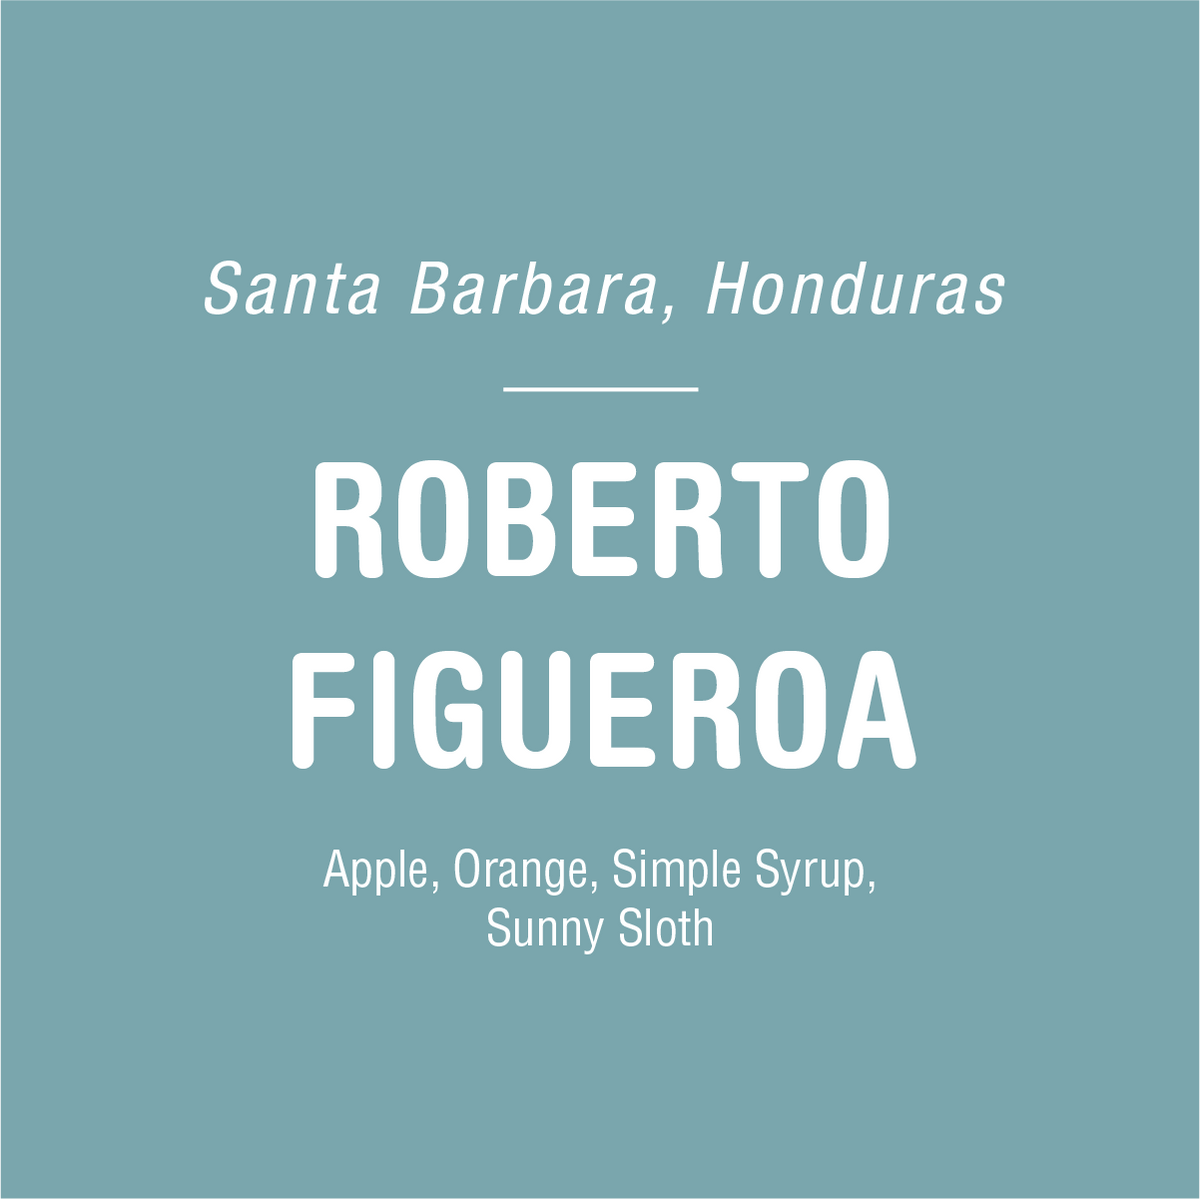 Text on a light blue background stating "santa barbara, honduras - Roberto Figueroa" with ingredients listed as "apple, orange, simple syrup, high-quality coffee from Tandem Coffee Roasters.